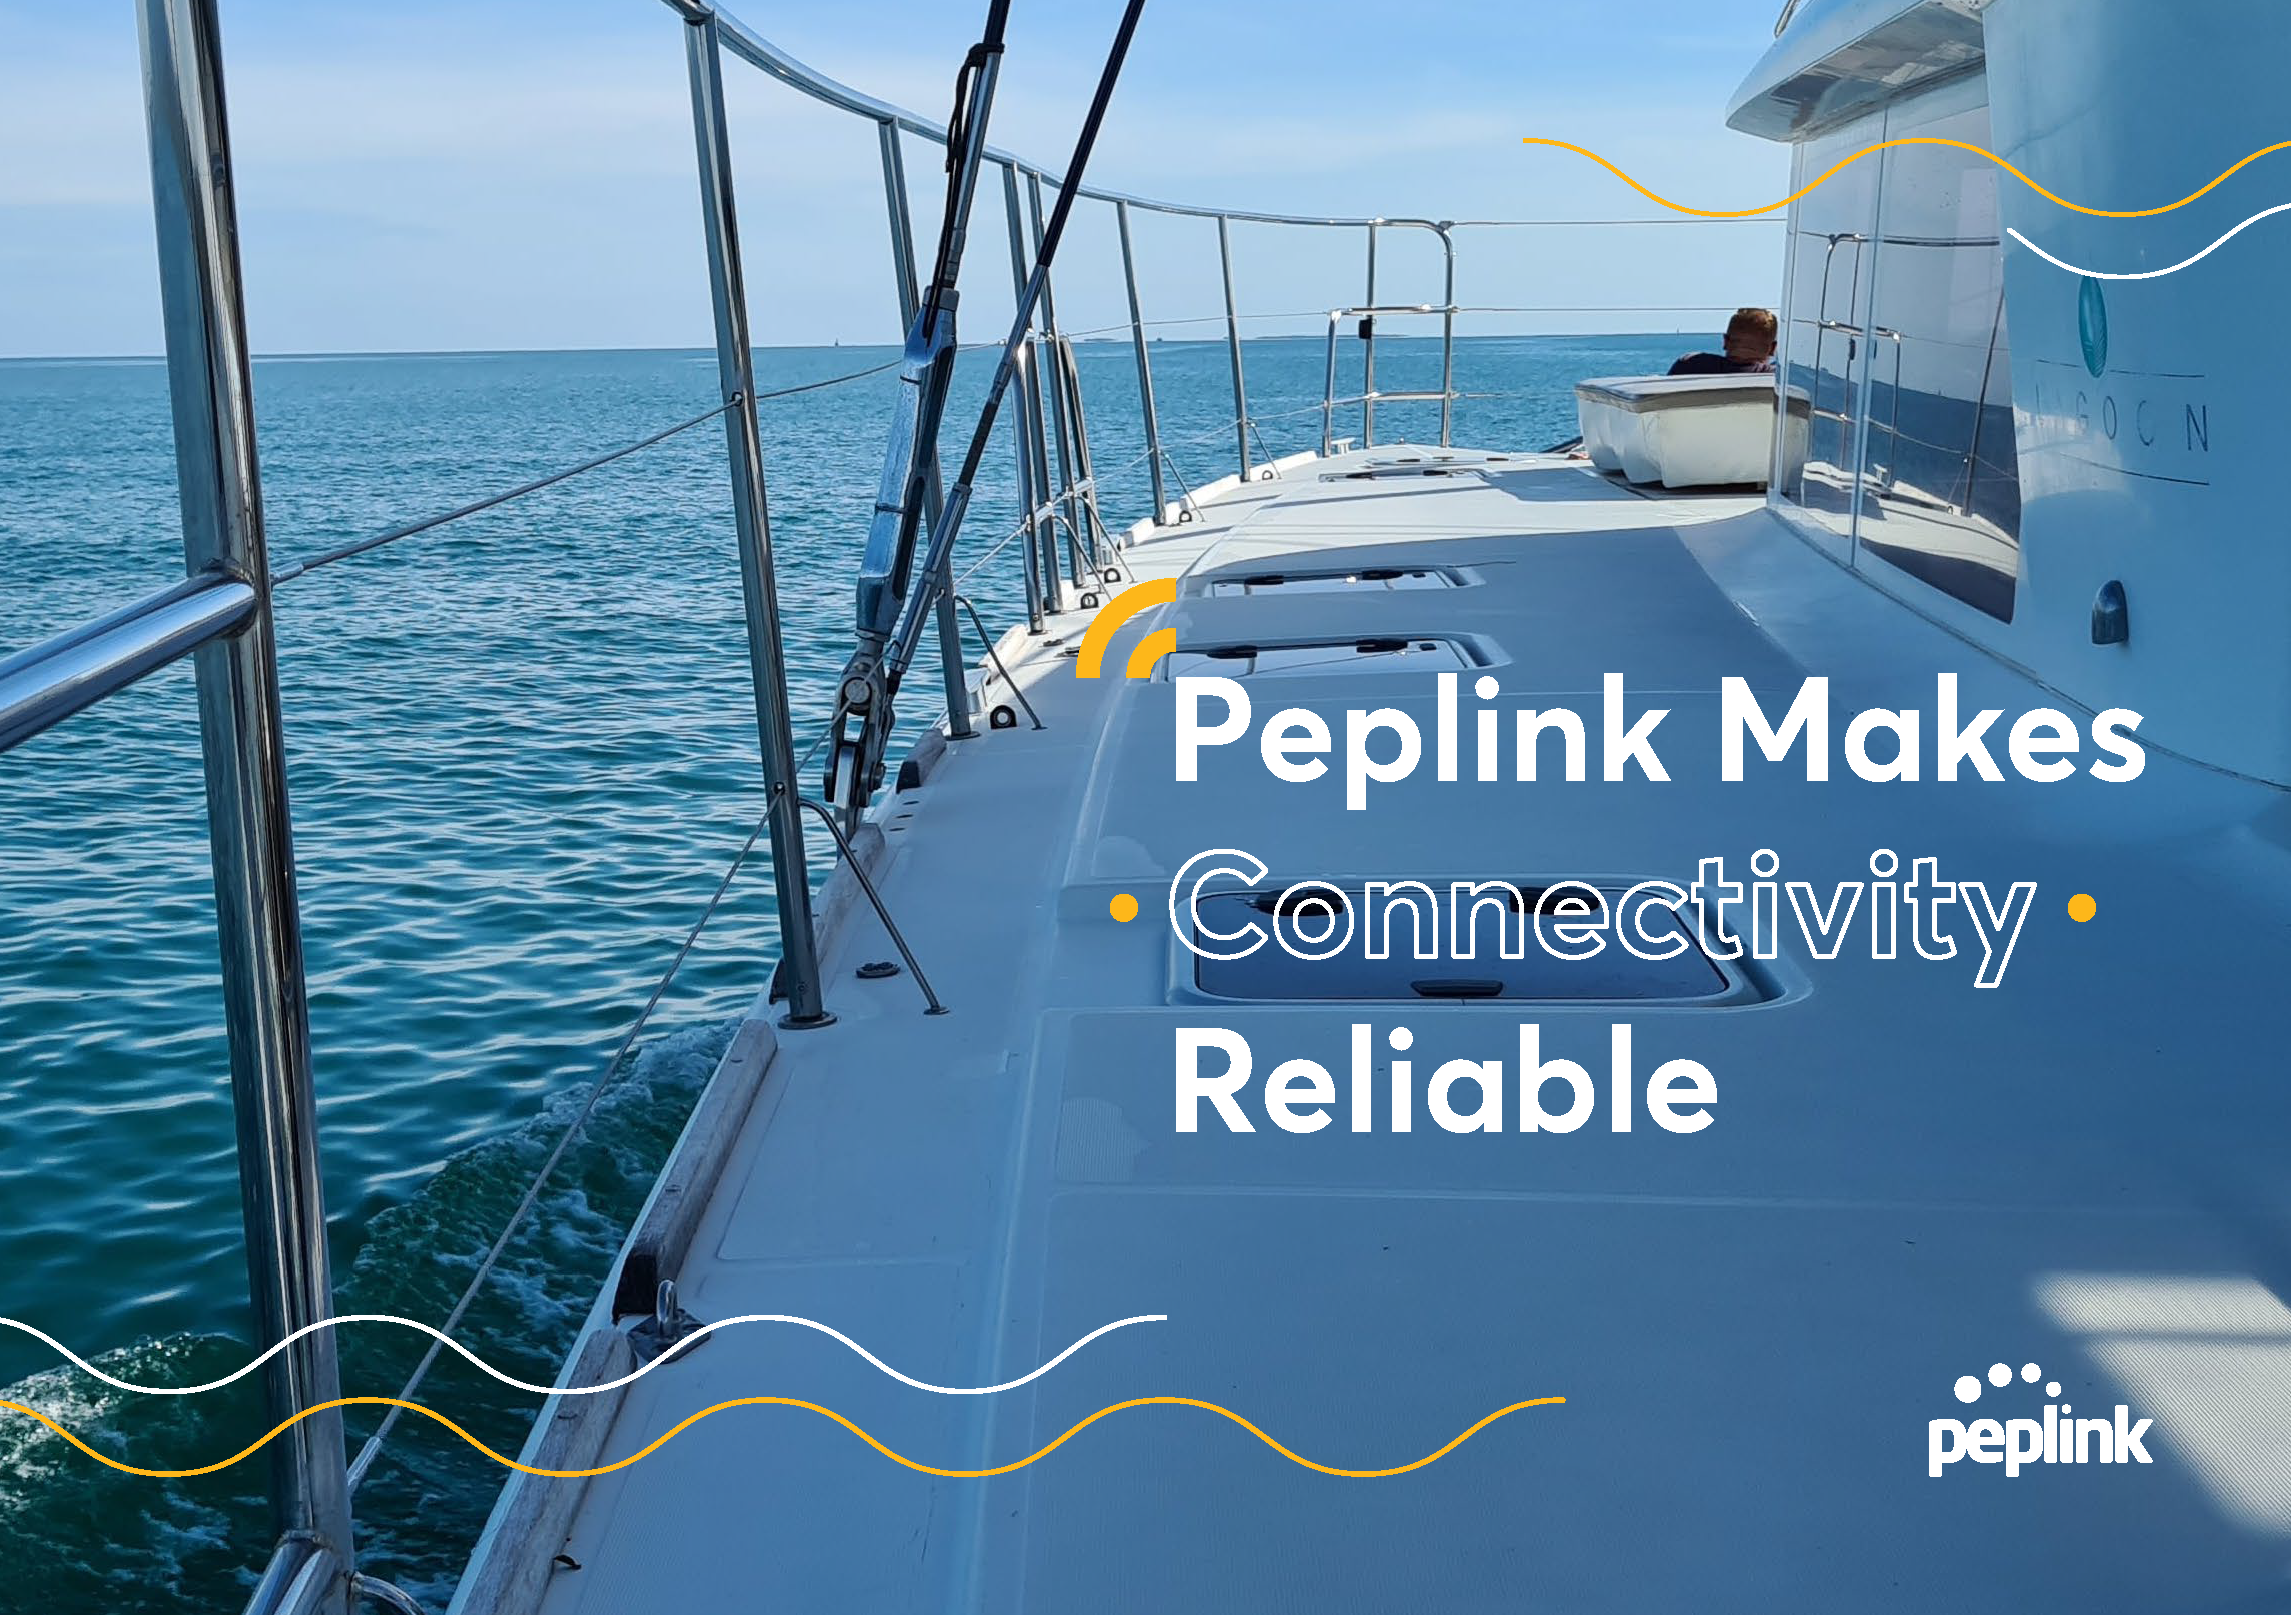 Peplink for Maritime Connectivity 2022